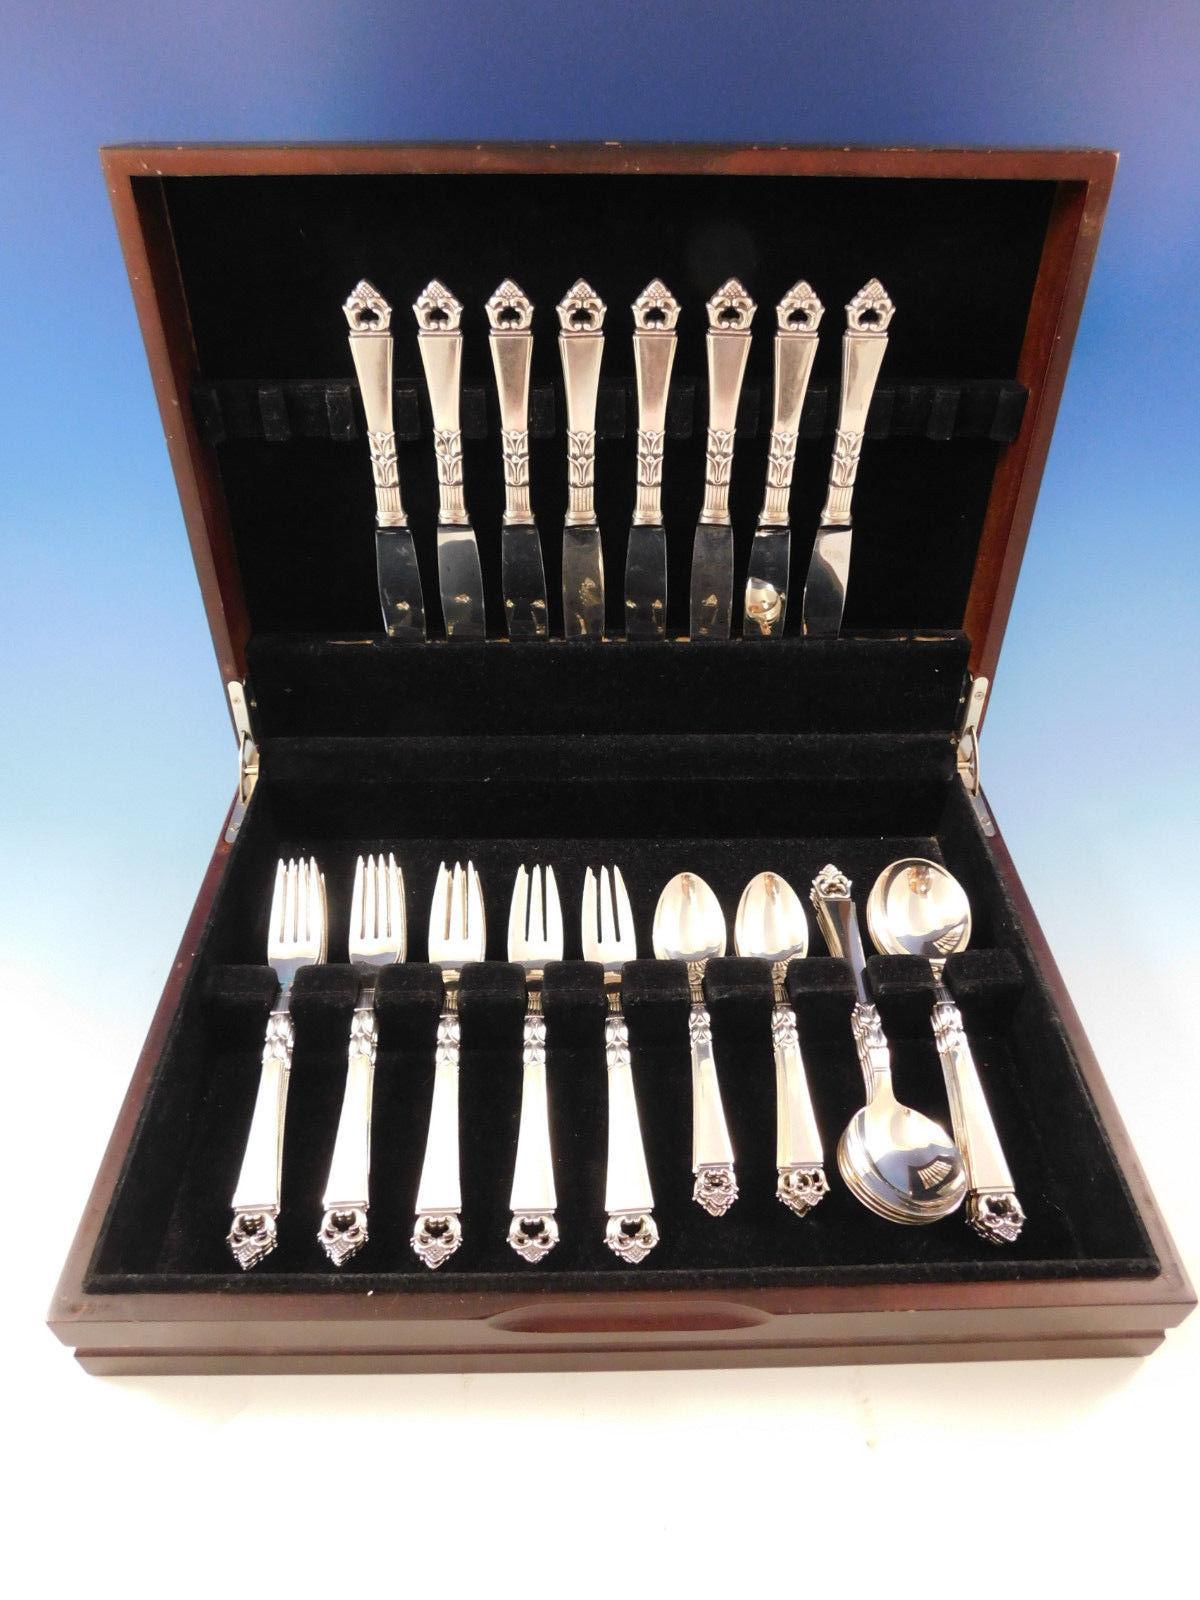 Danish Crown by Frigast Silversmiths of Copenhagen, Denmark sterling silver flatware set of 40 pieces. This set includes:

Eight knives, 8 1/2